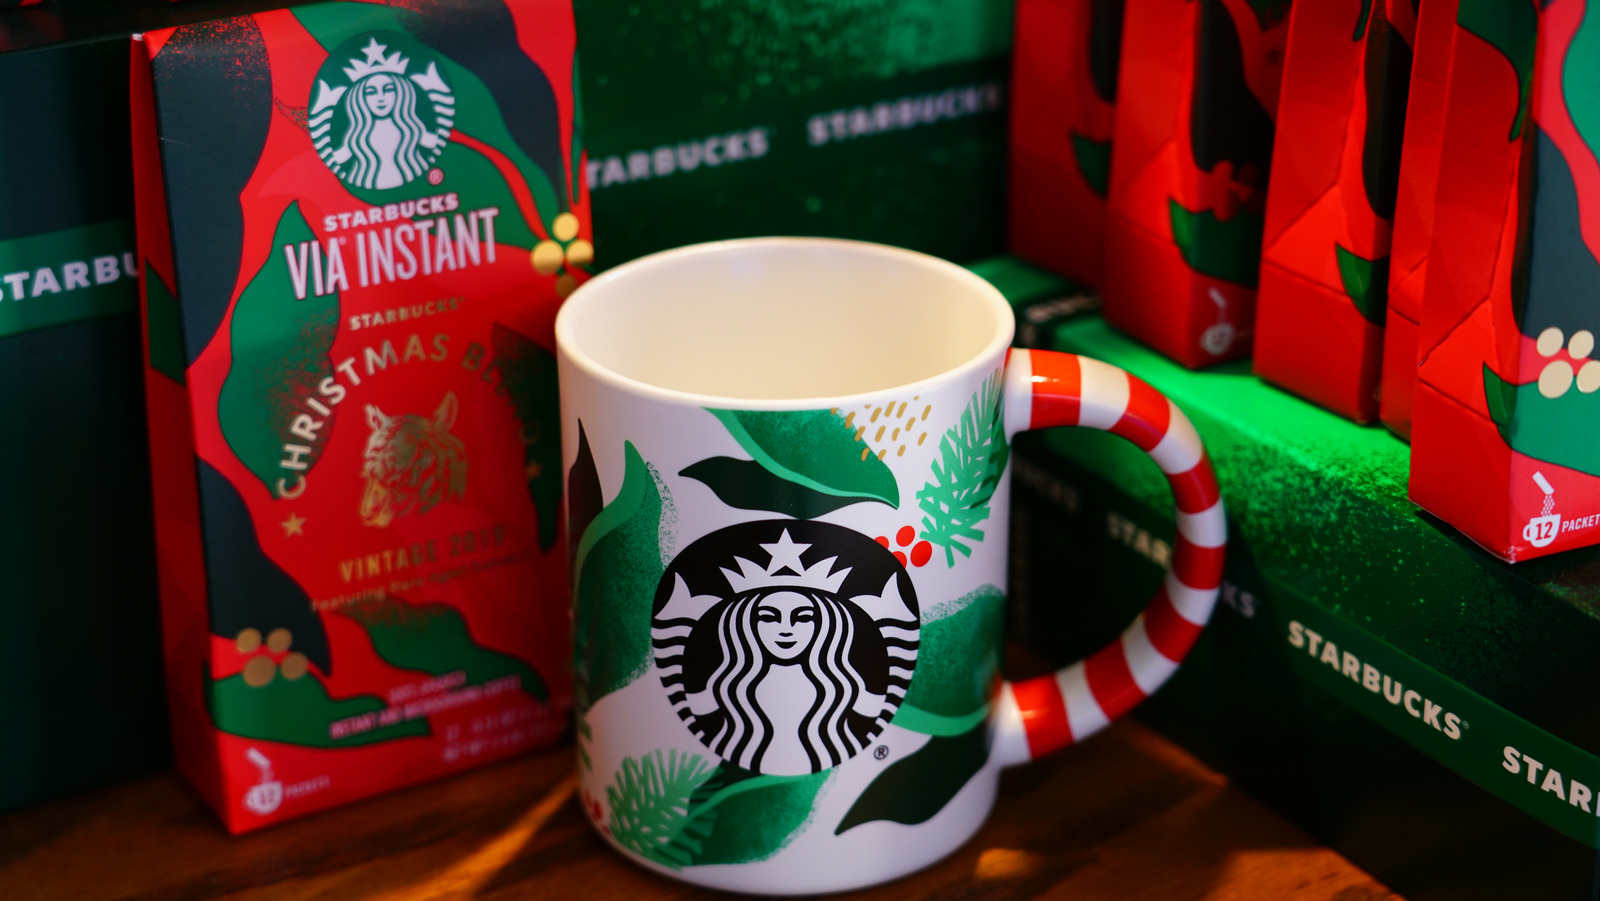 https://www.tastingtable.com/img/gallery/the-difference-between-starbucks-christmas-and-holiday-blends/l-intro-1667856058.jpg